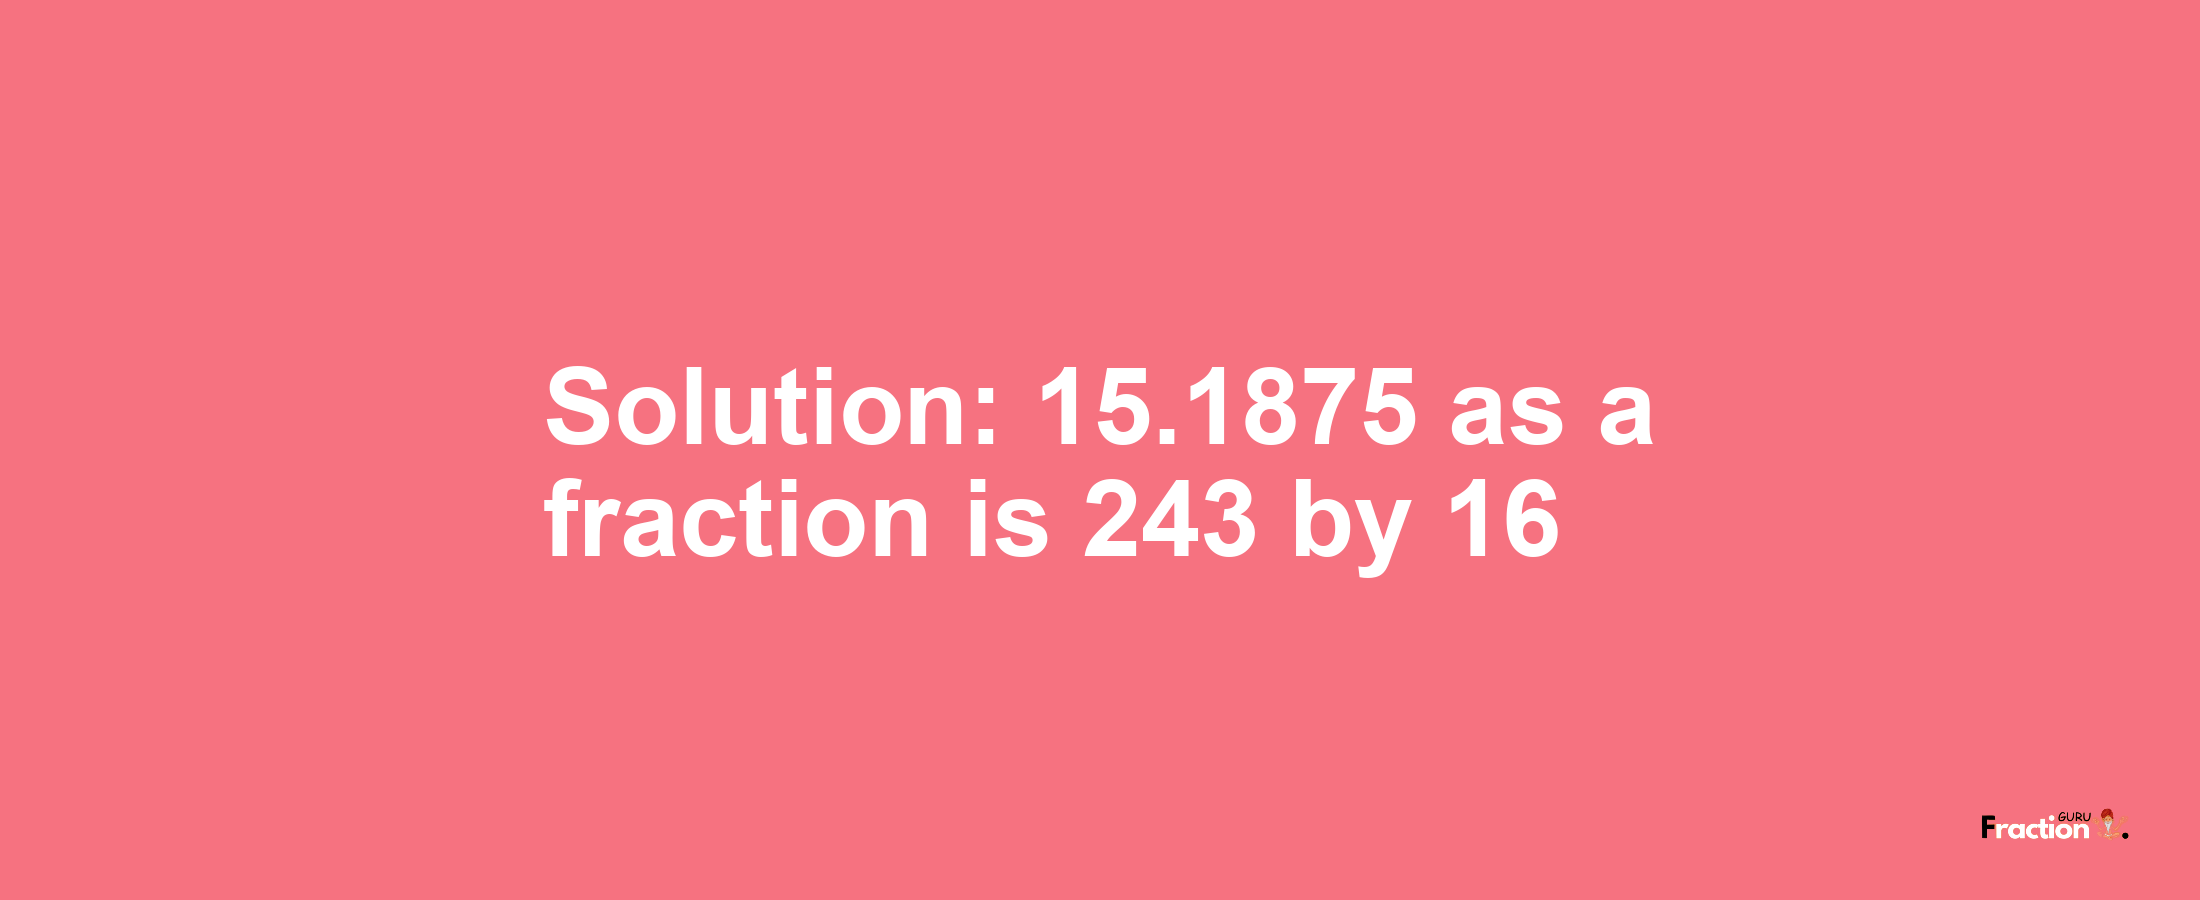 Solution:15.1875 as a fraction is 243/16